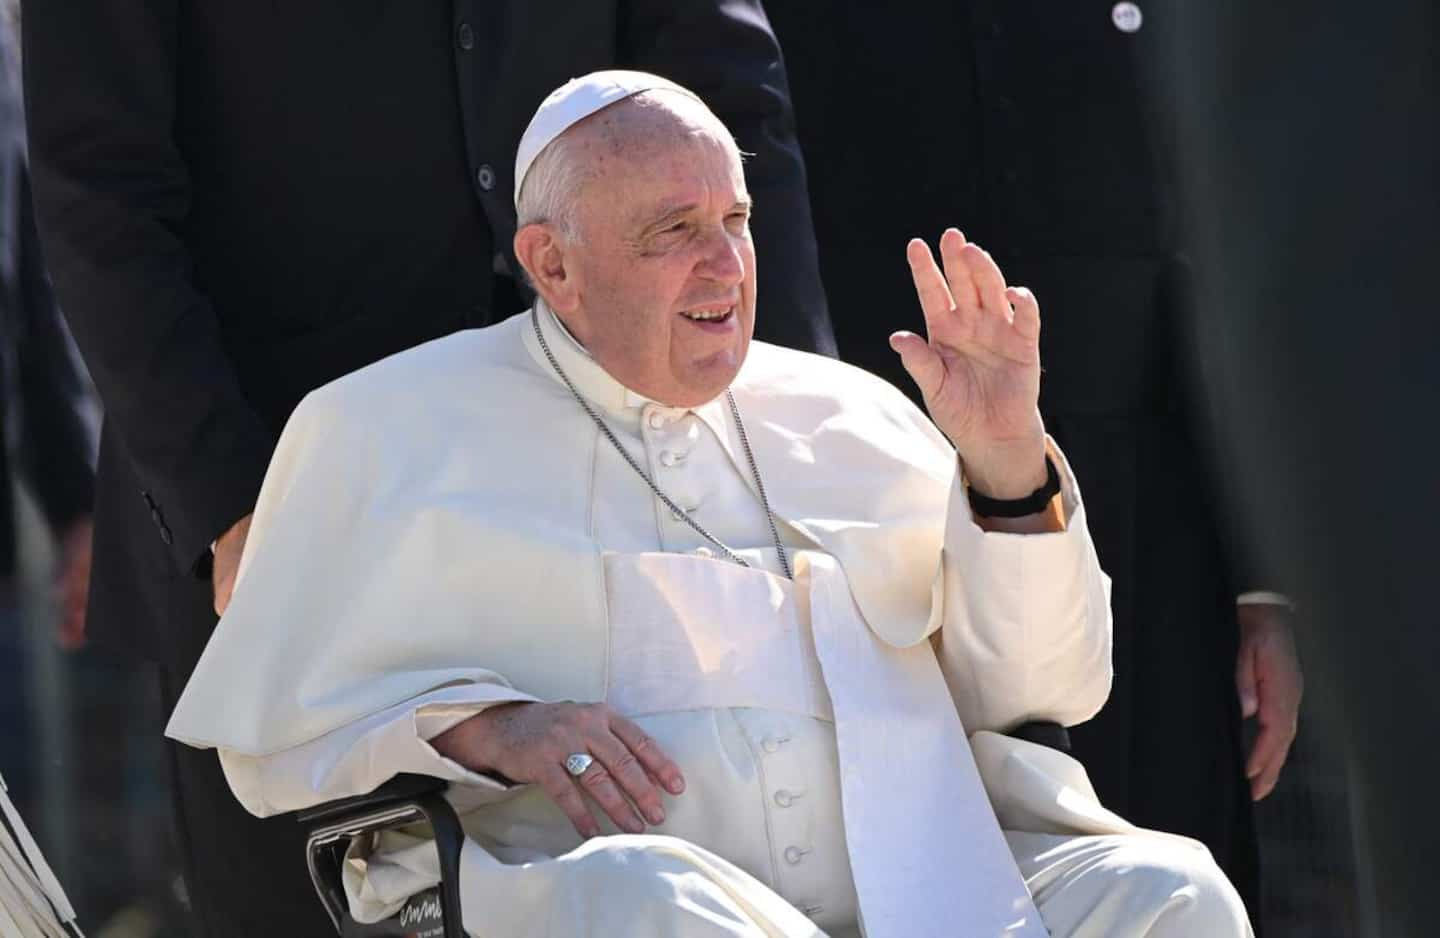 [LIVE] The Pope arrives in Quebec: follow all the developments